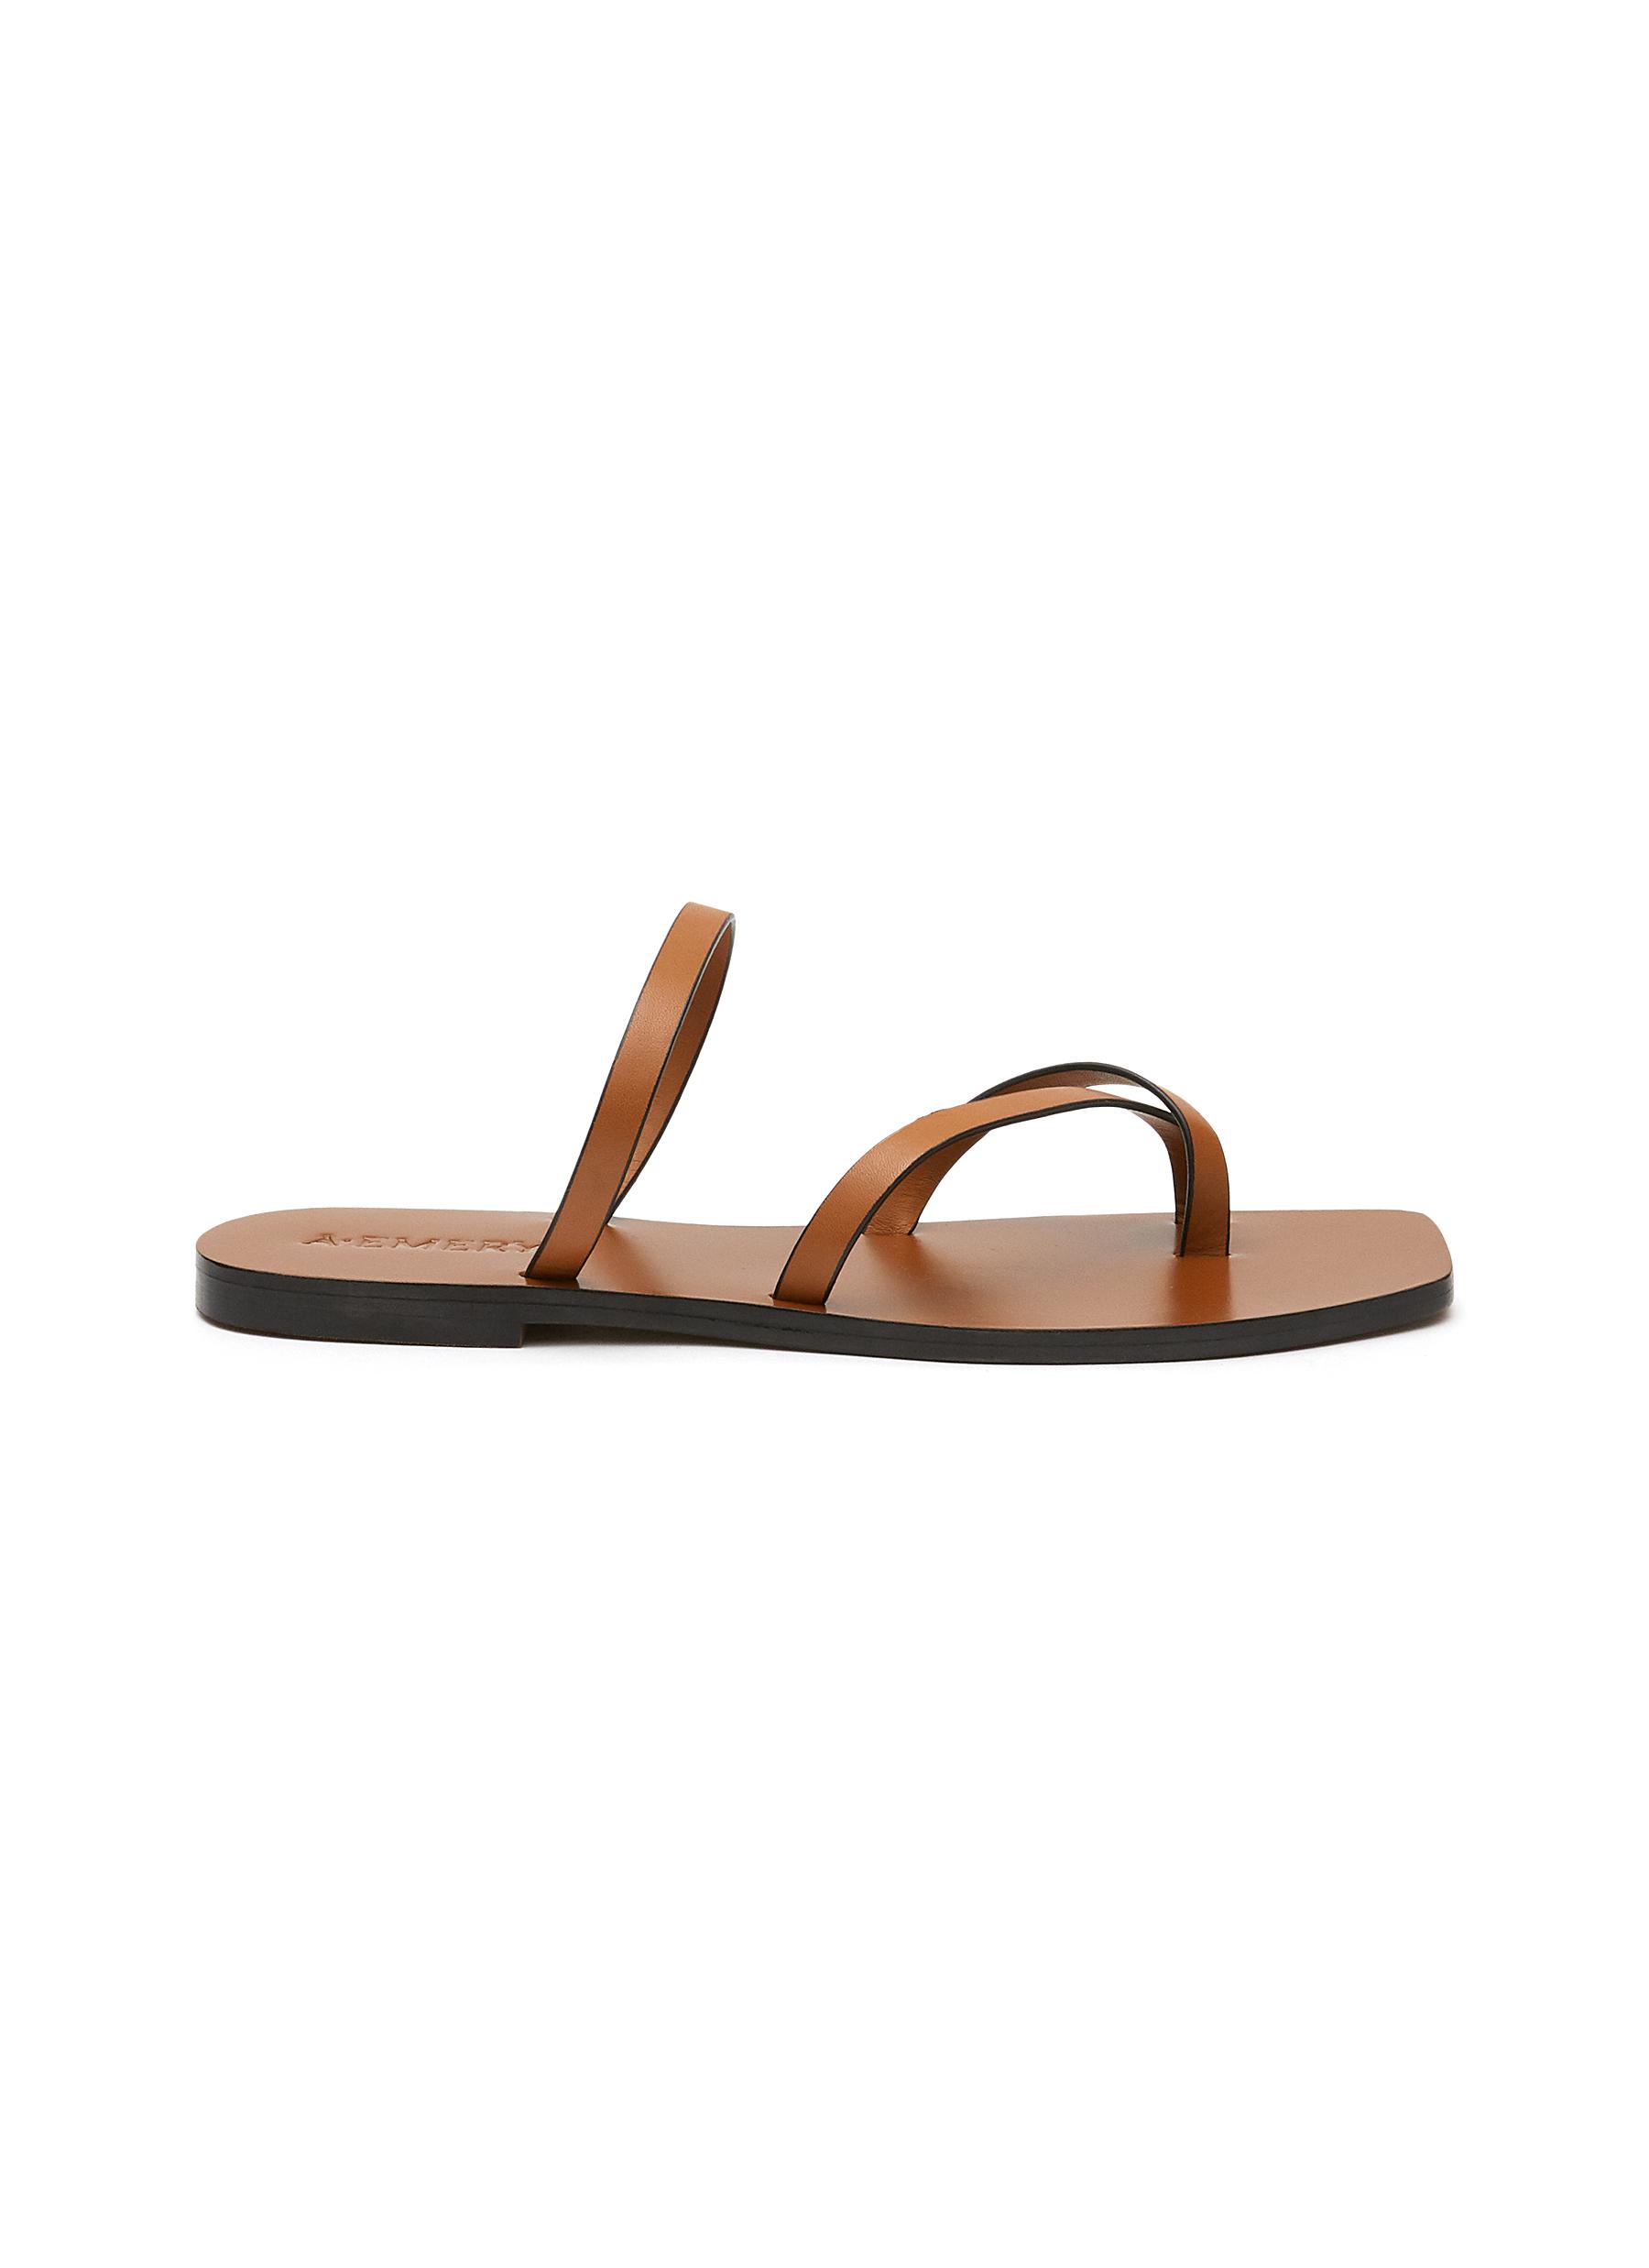 'Colby' square toe leather toe ring sandals